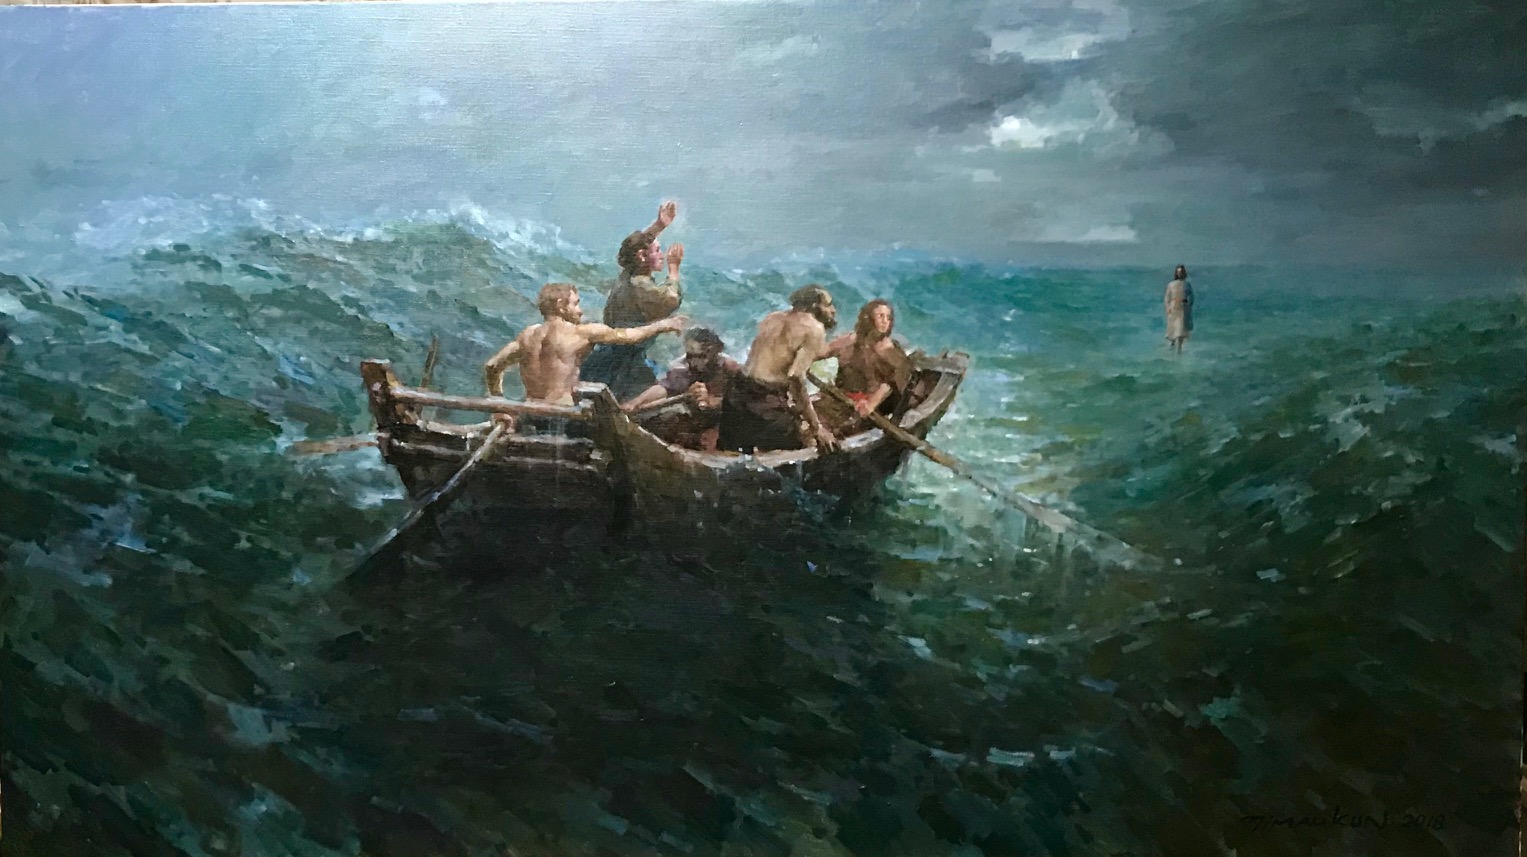 Jesus walking on water – from the perspective of an artist